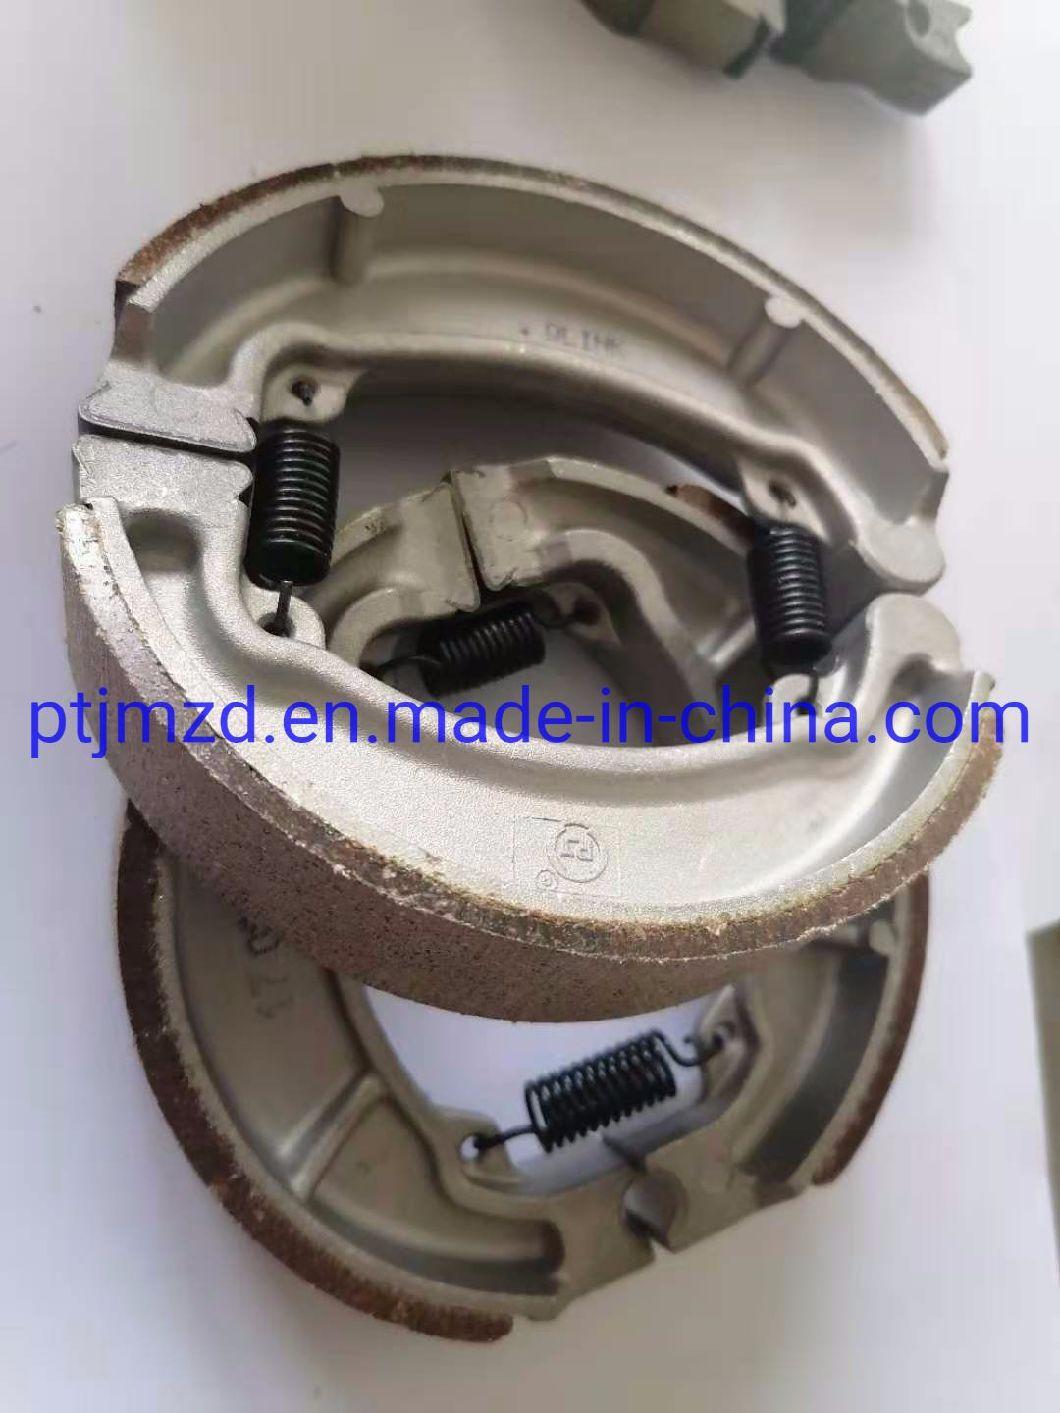 Motorcycle Brake Shoes. Motorcycle Parts, Auto Spare Part--Qj50q-9A